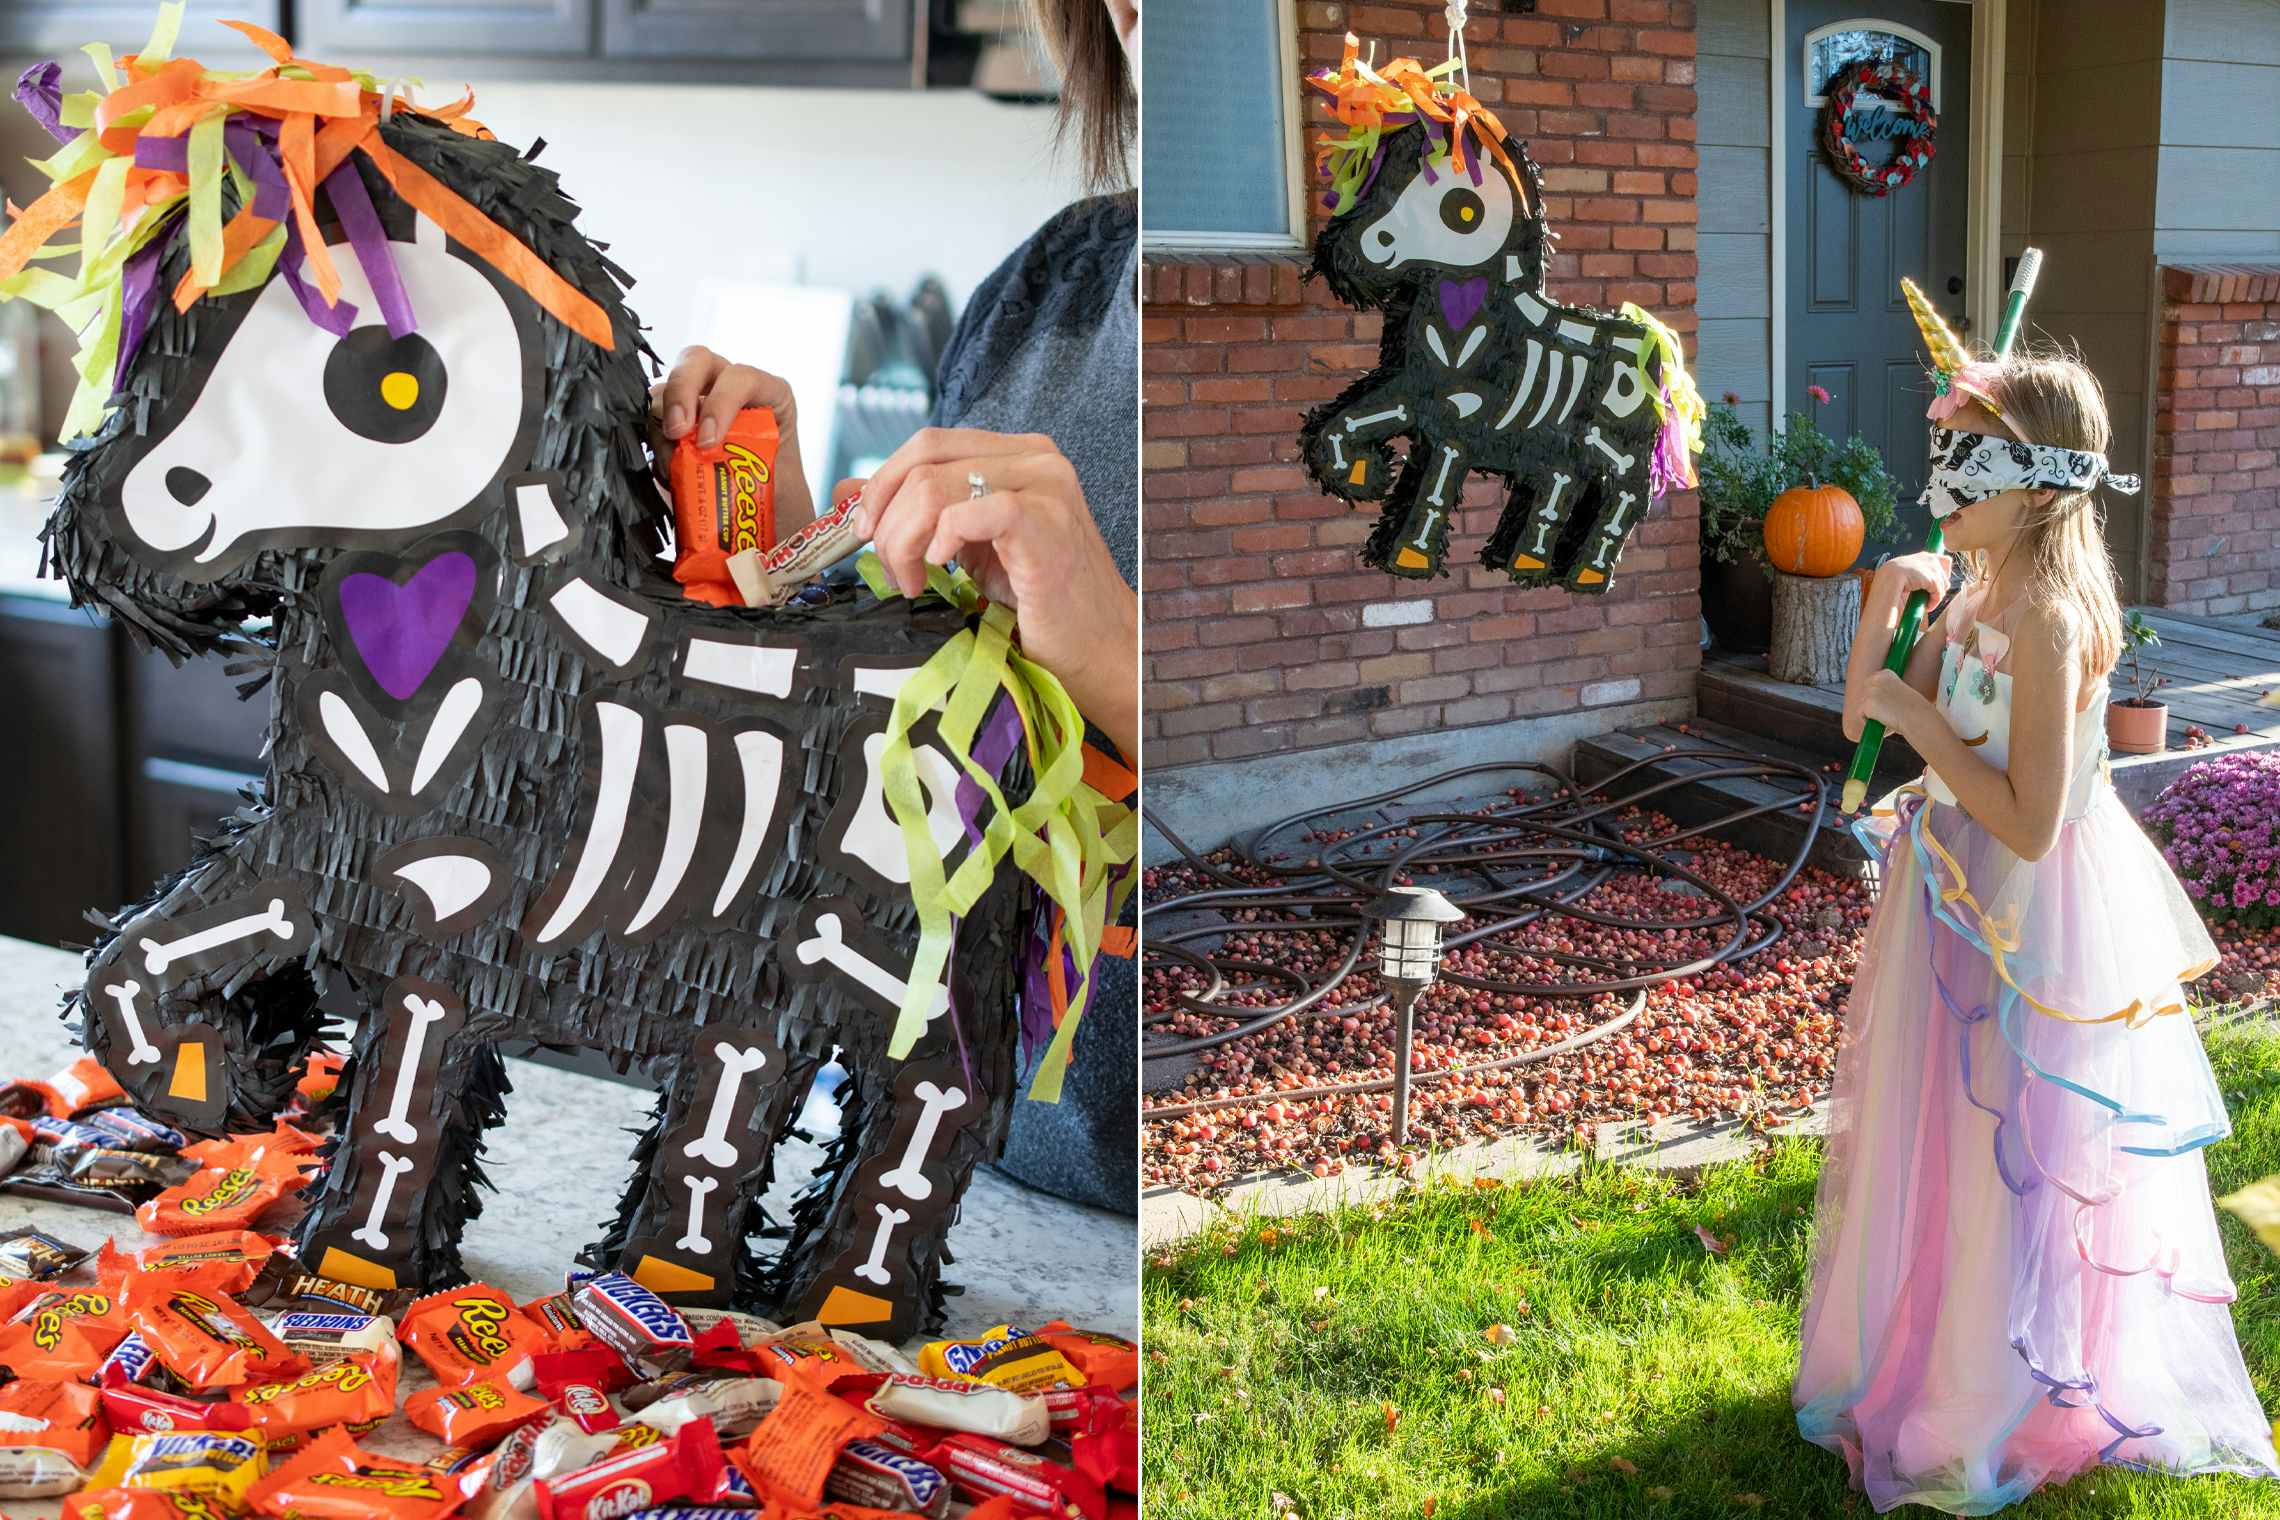 A woman filling a Halloween skeleton unicorn piñata with candy and a little girl wearing a blind fold and a halloween costume, holding a broom stick, ready to hit the piñata.